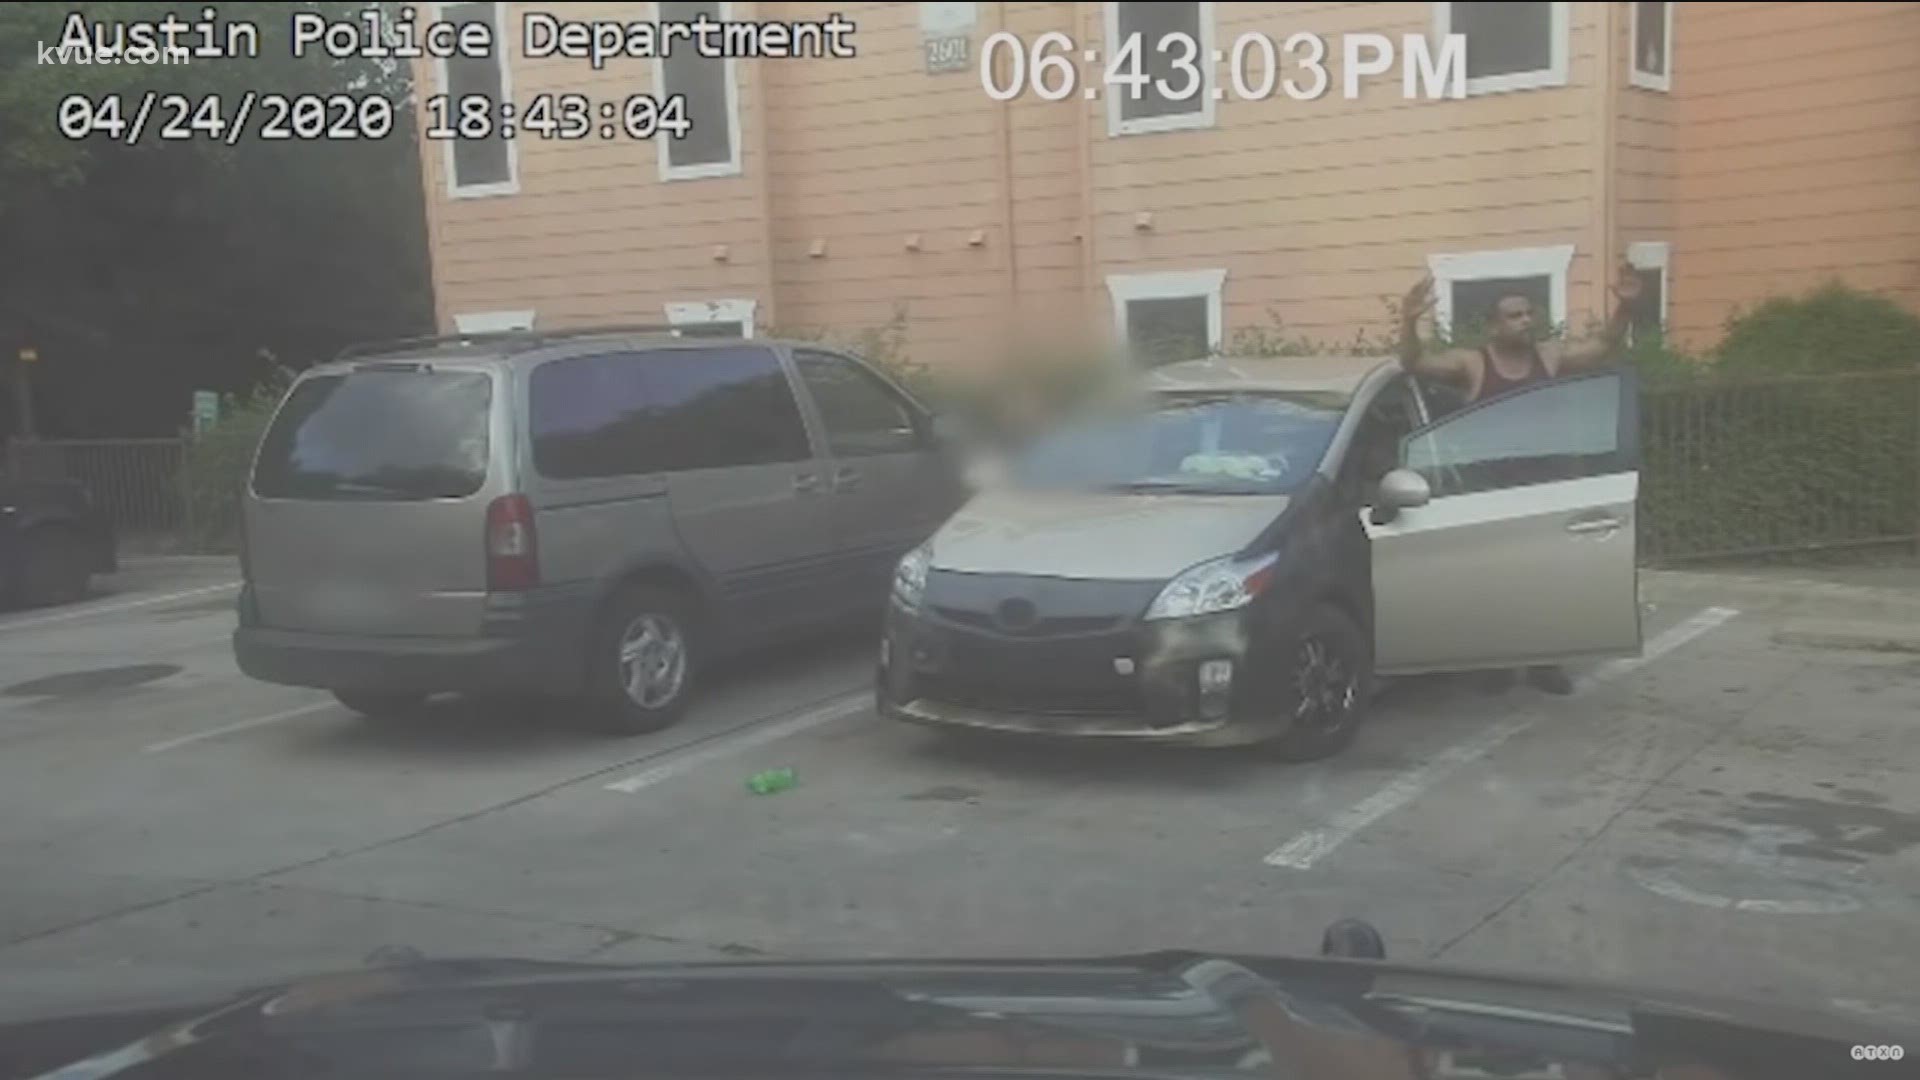 After weeks of protests and calls for justice, Austin police are sharing dashcam and body camera video from the day officers shot and killed Michael Ramos.